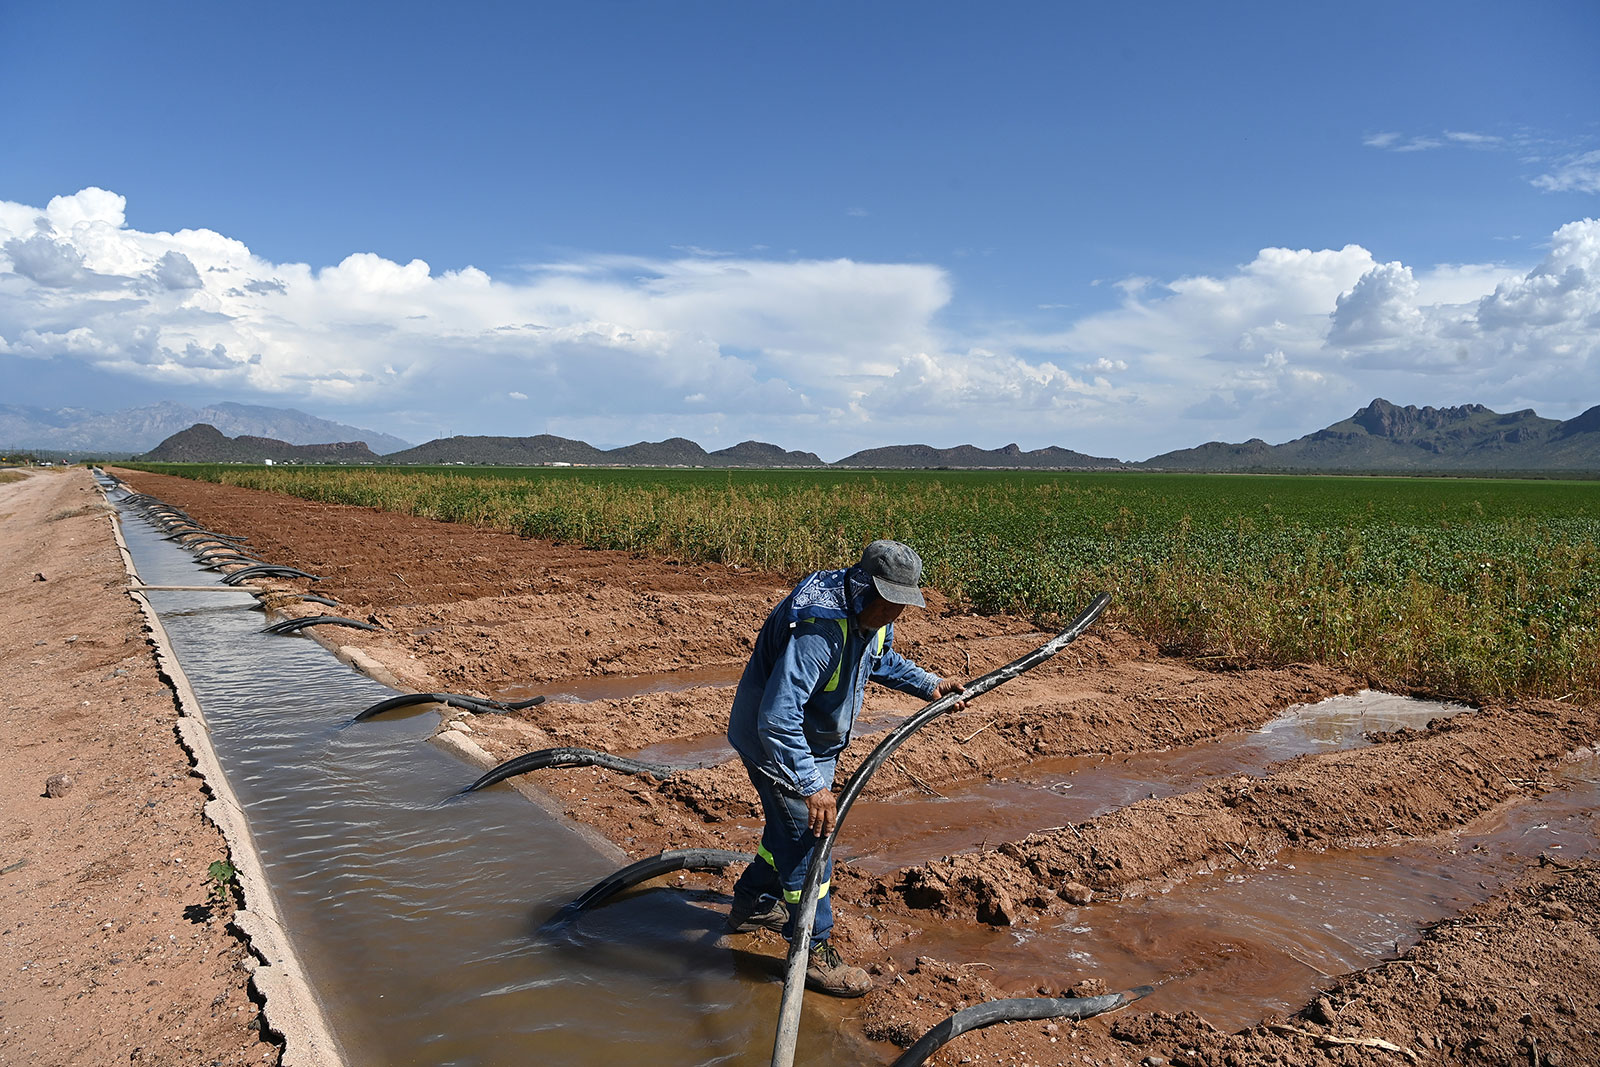 A worker irrigates a cotton field using a ditch that draws water from the Central Arizona Project at a farm in Marana, Arizona, in August 2021.